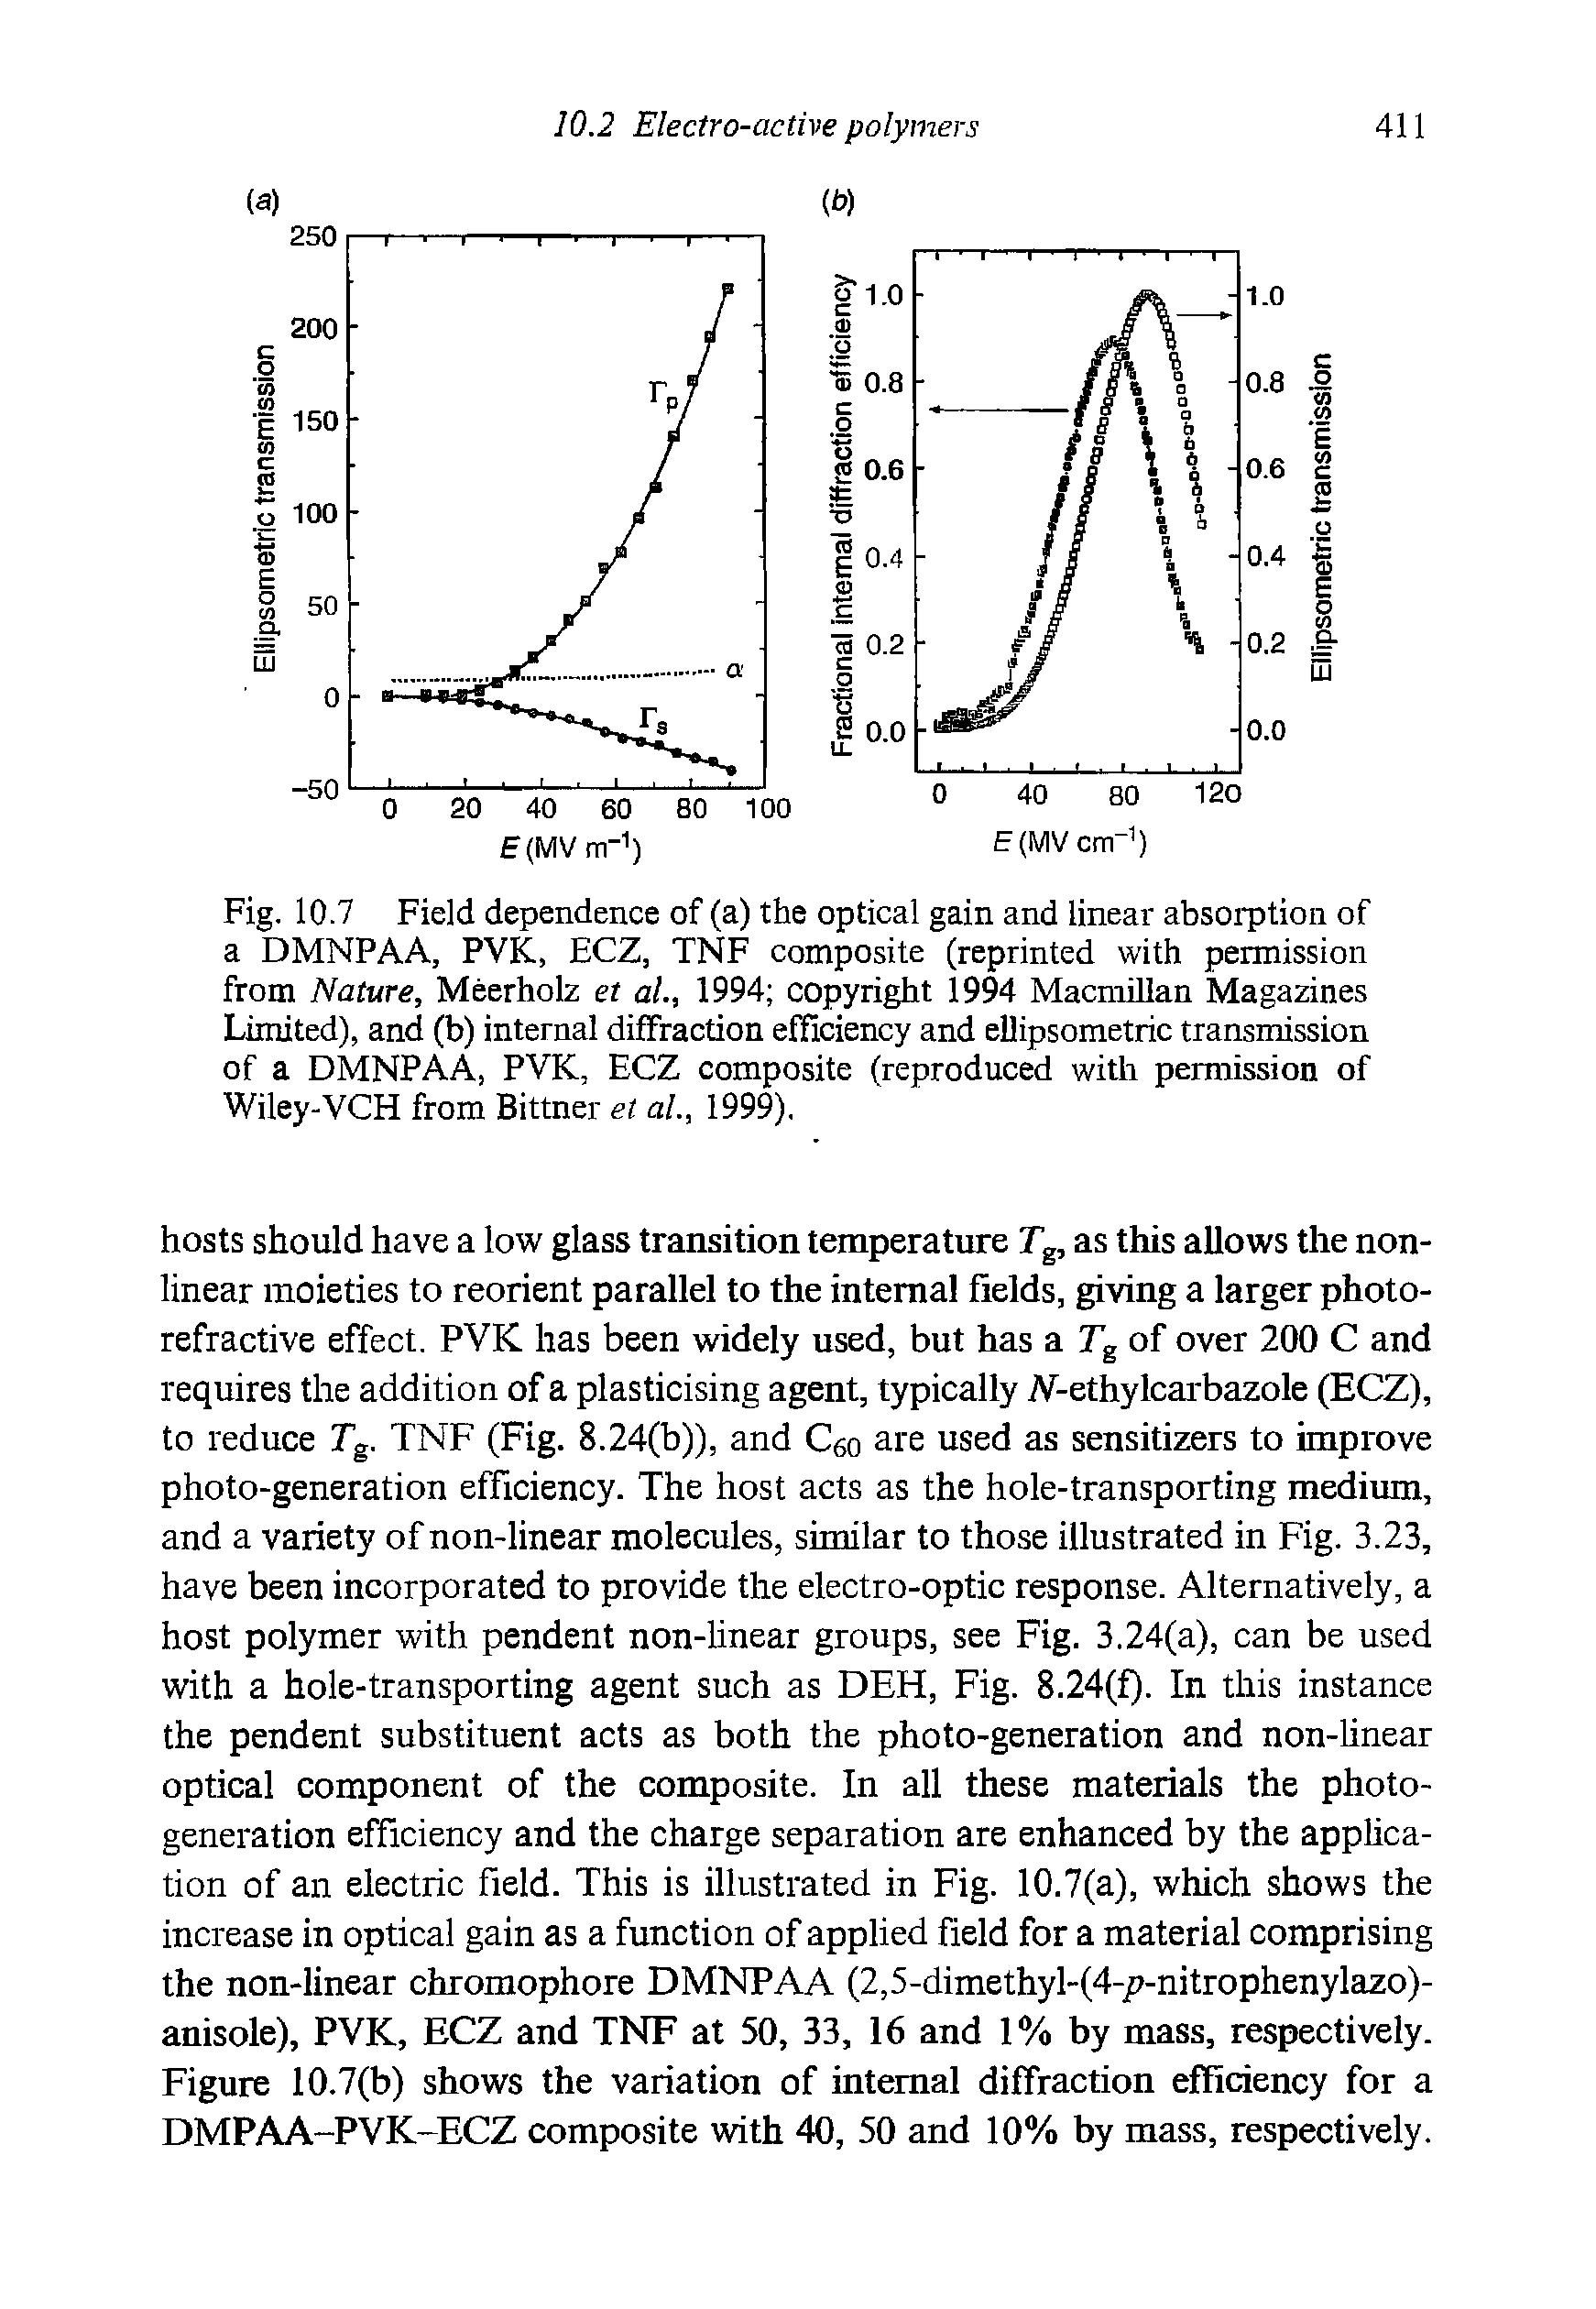 Fig. 10.7 Field dependence of (a) the optical gain and linear absorption of a DMNPAA, PVK, ECZ, TNF composite (reprinted with permission from Nature, Meerholz et al., 1994 copyright 1994 Macmillan Magazines Limited), and (b) internal diffraction efficiency and ellipsometric transmission of a DMNPAA, PVK, ECZ composite (reproduced with permission of Wiley-VCH from Bittner et al., 1999).